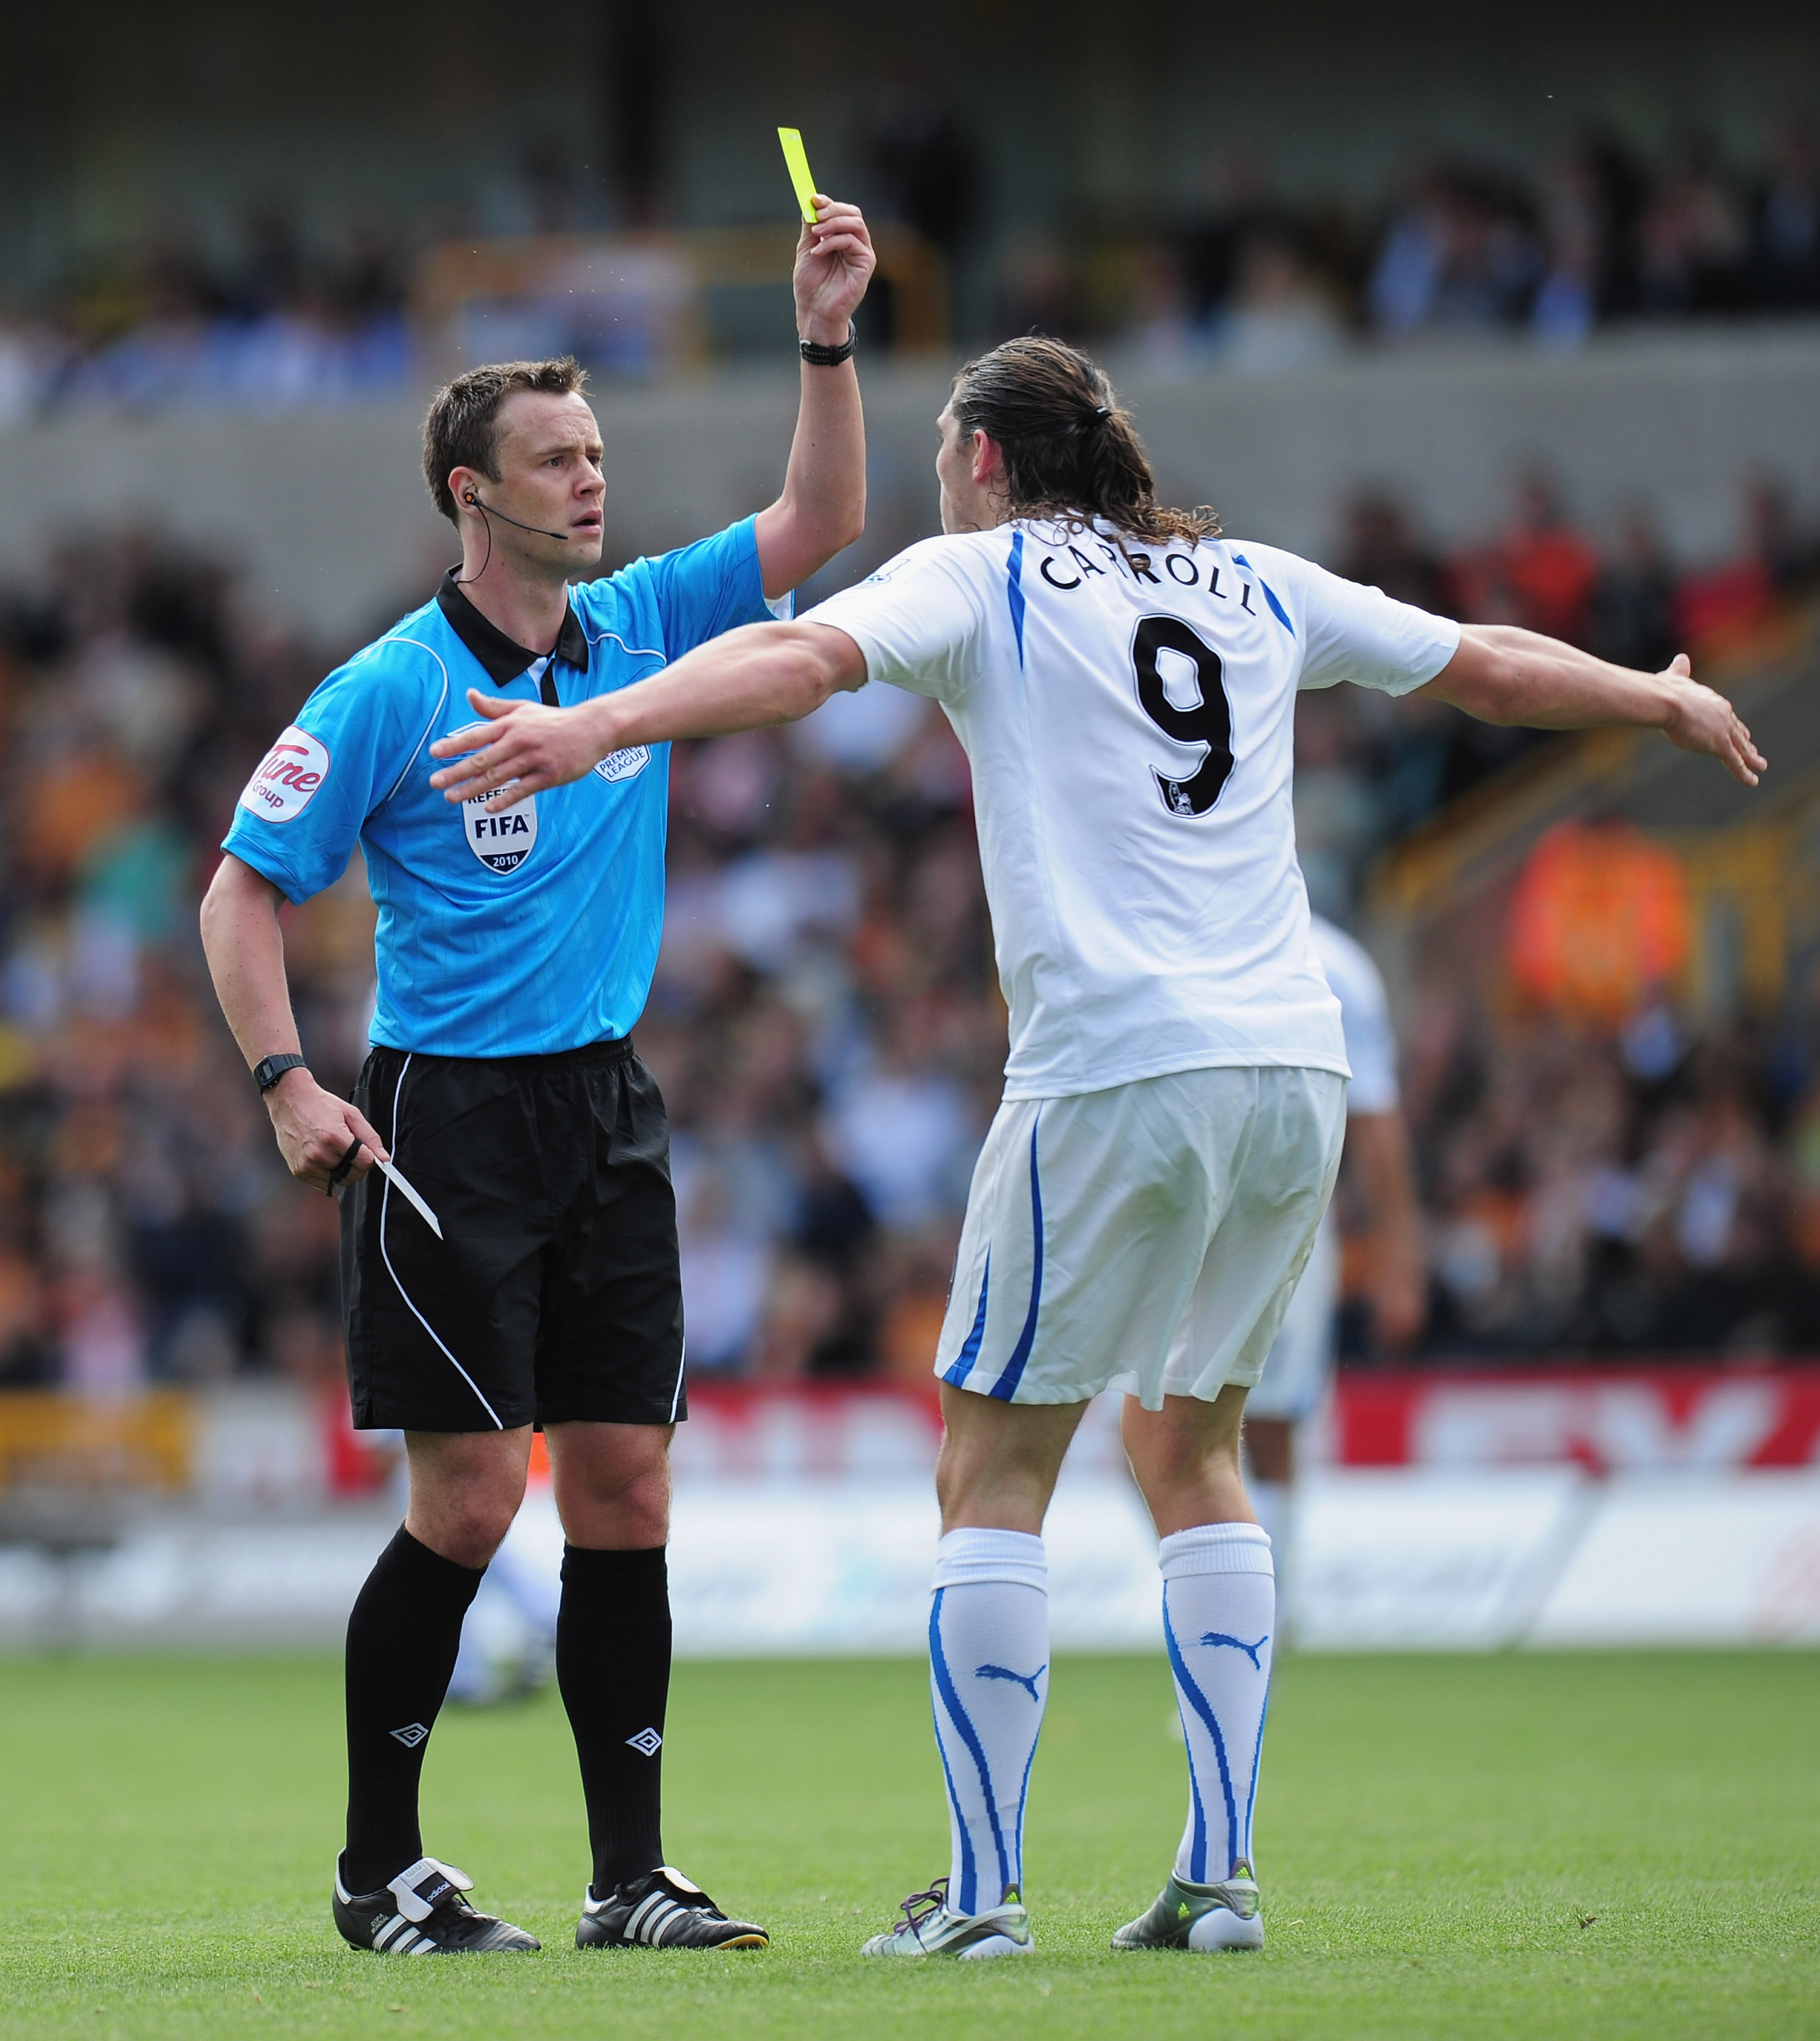 WOLVERHAMPTON, ENGLAND - AUGUST 28:  Andy Carroll of Newcastle United is booked by referee Stuart Attwell during the Barclays Premier League match between Wolverhampton Wanderers and Newcastle United at Molineux on August 28, 2010 in Wolverhampton, Englan